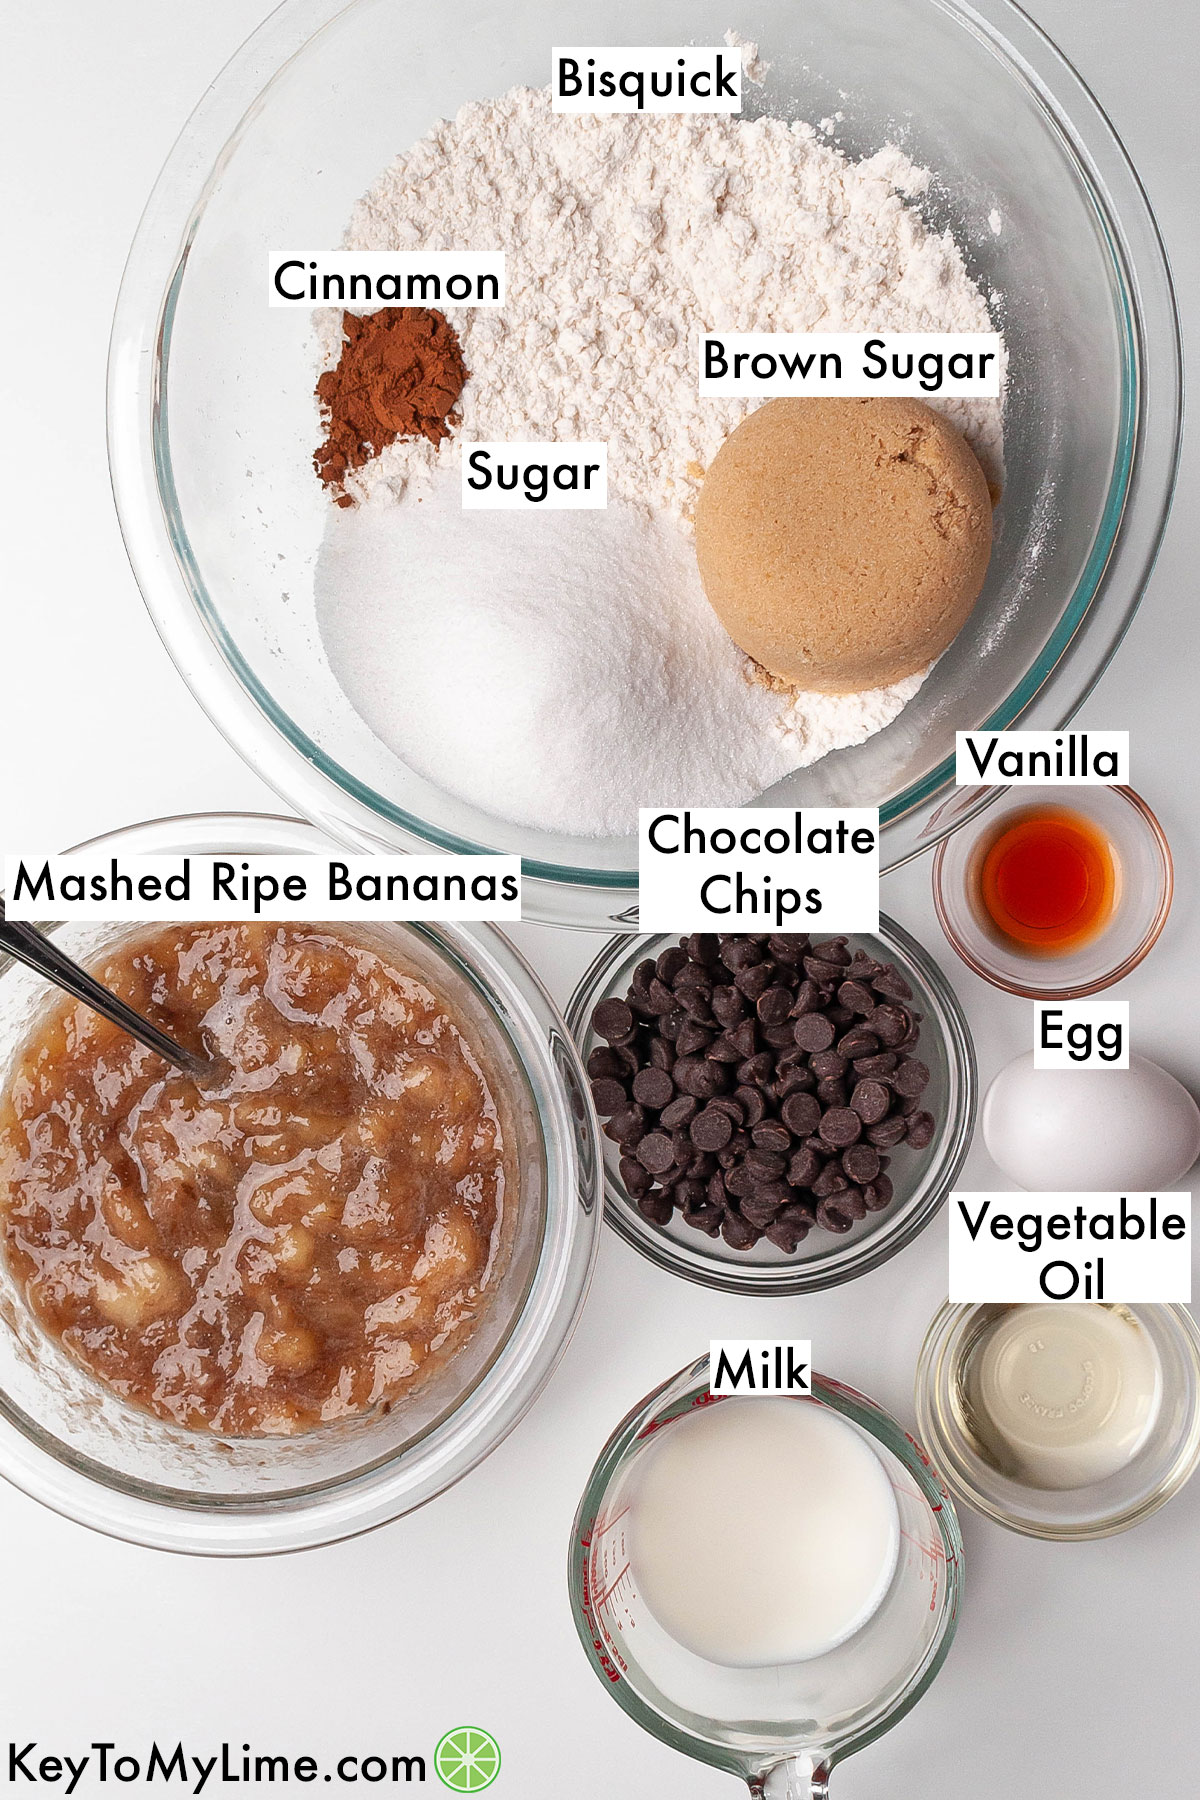 The labeled ingredients for Bisquick banana muffins.